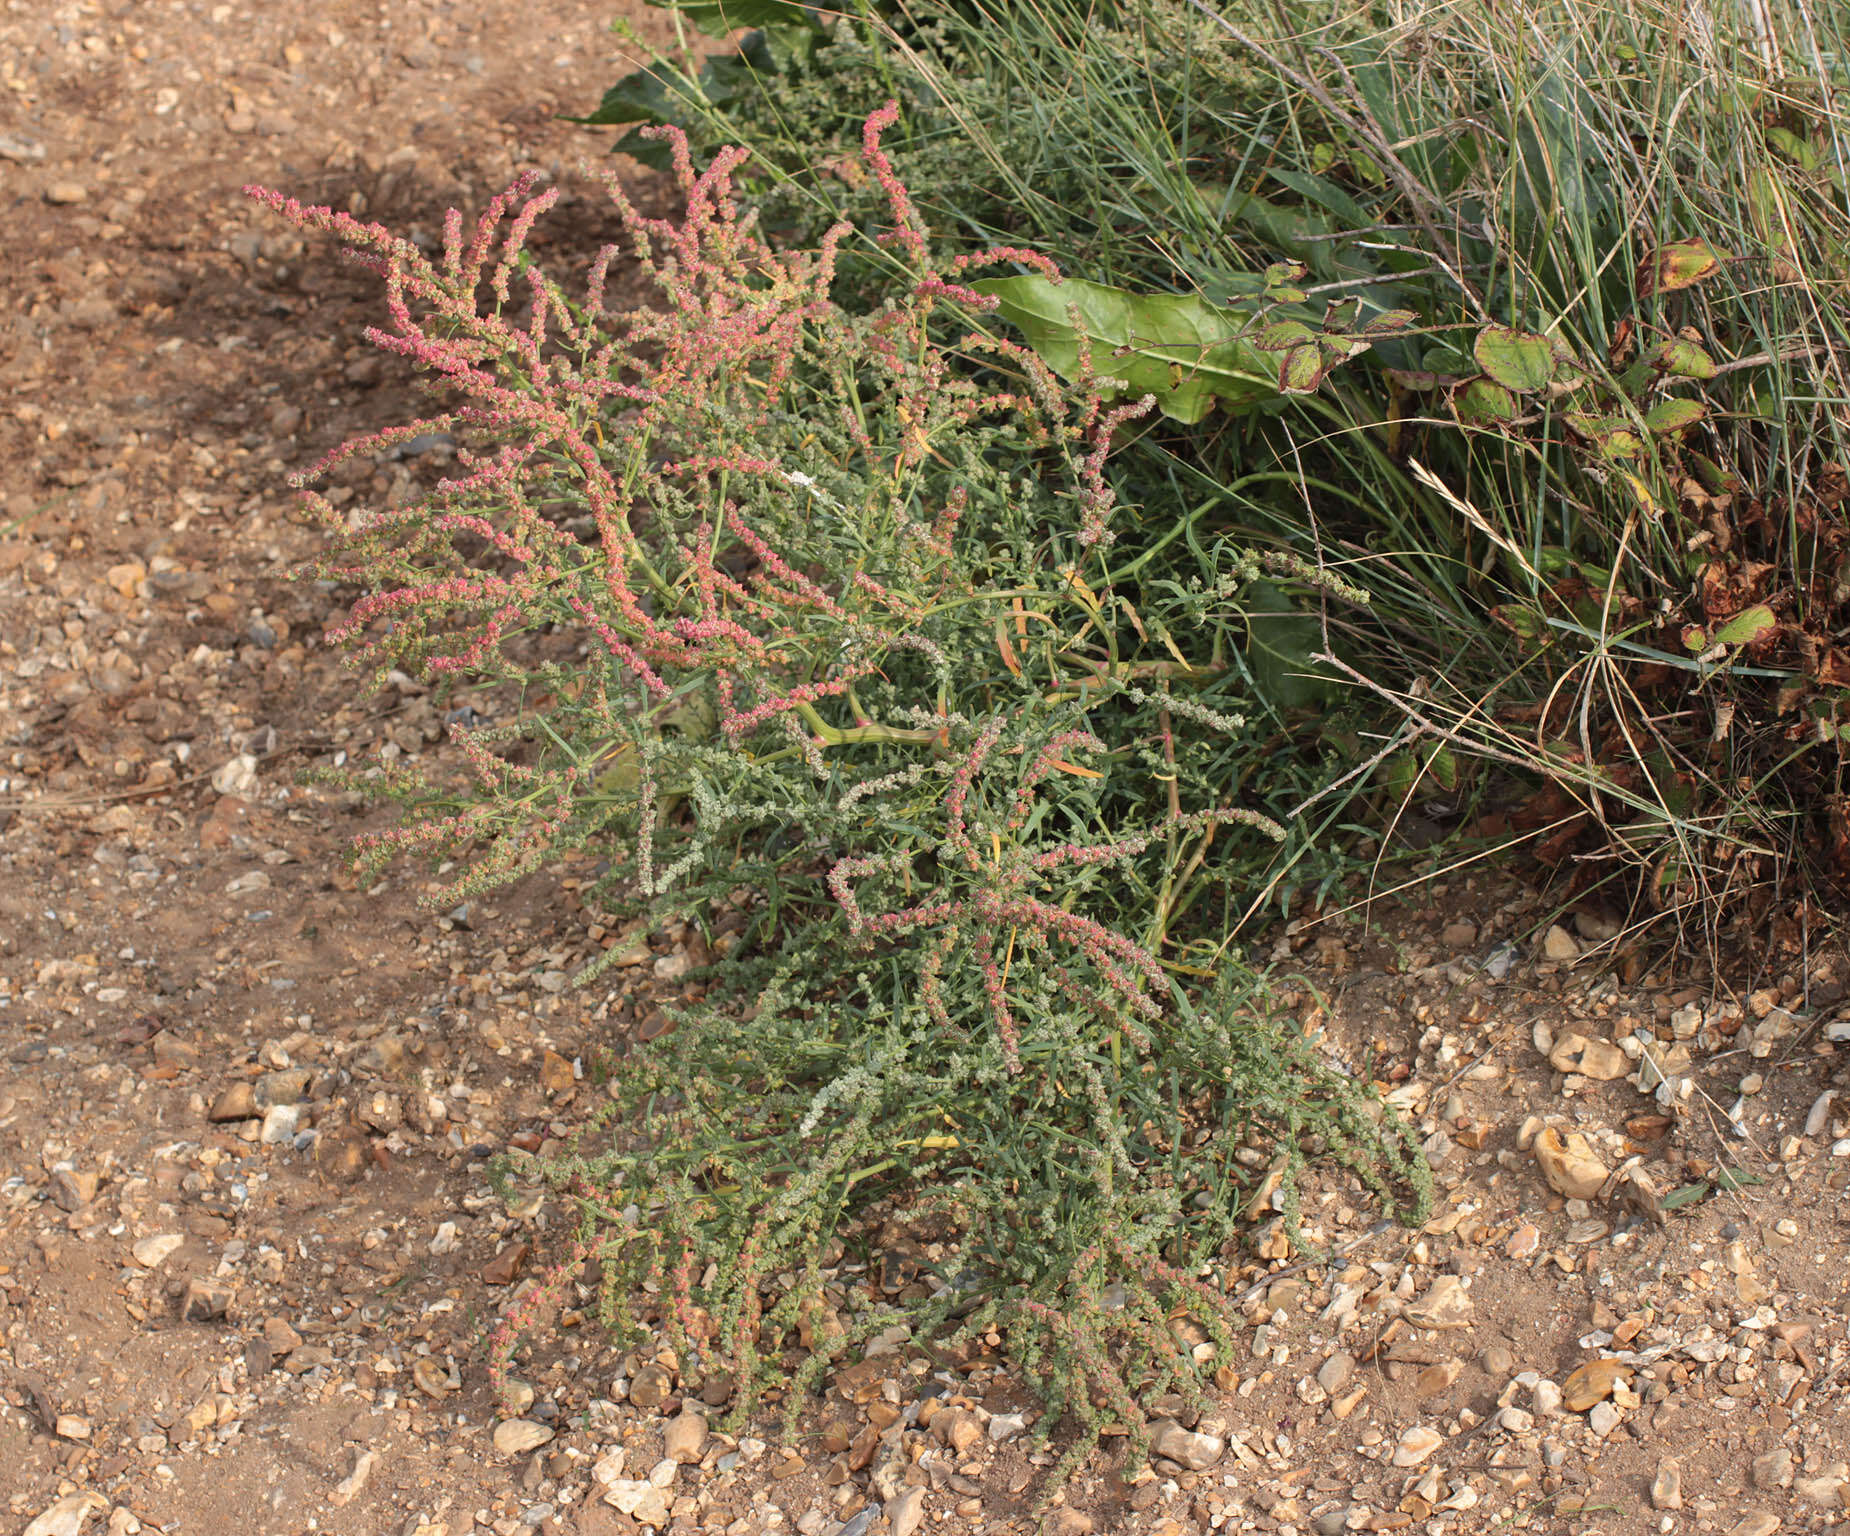 Image of Grass-leaved orache